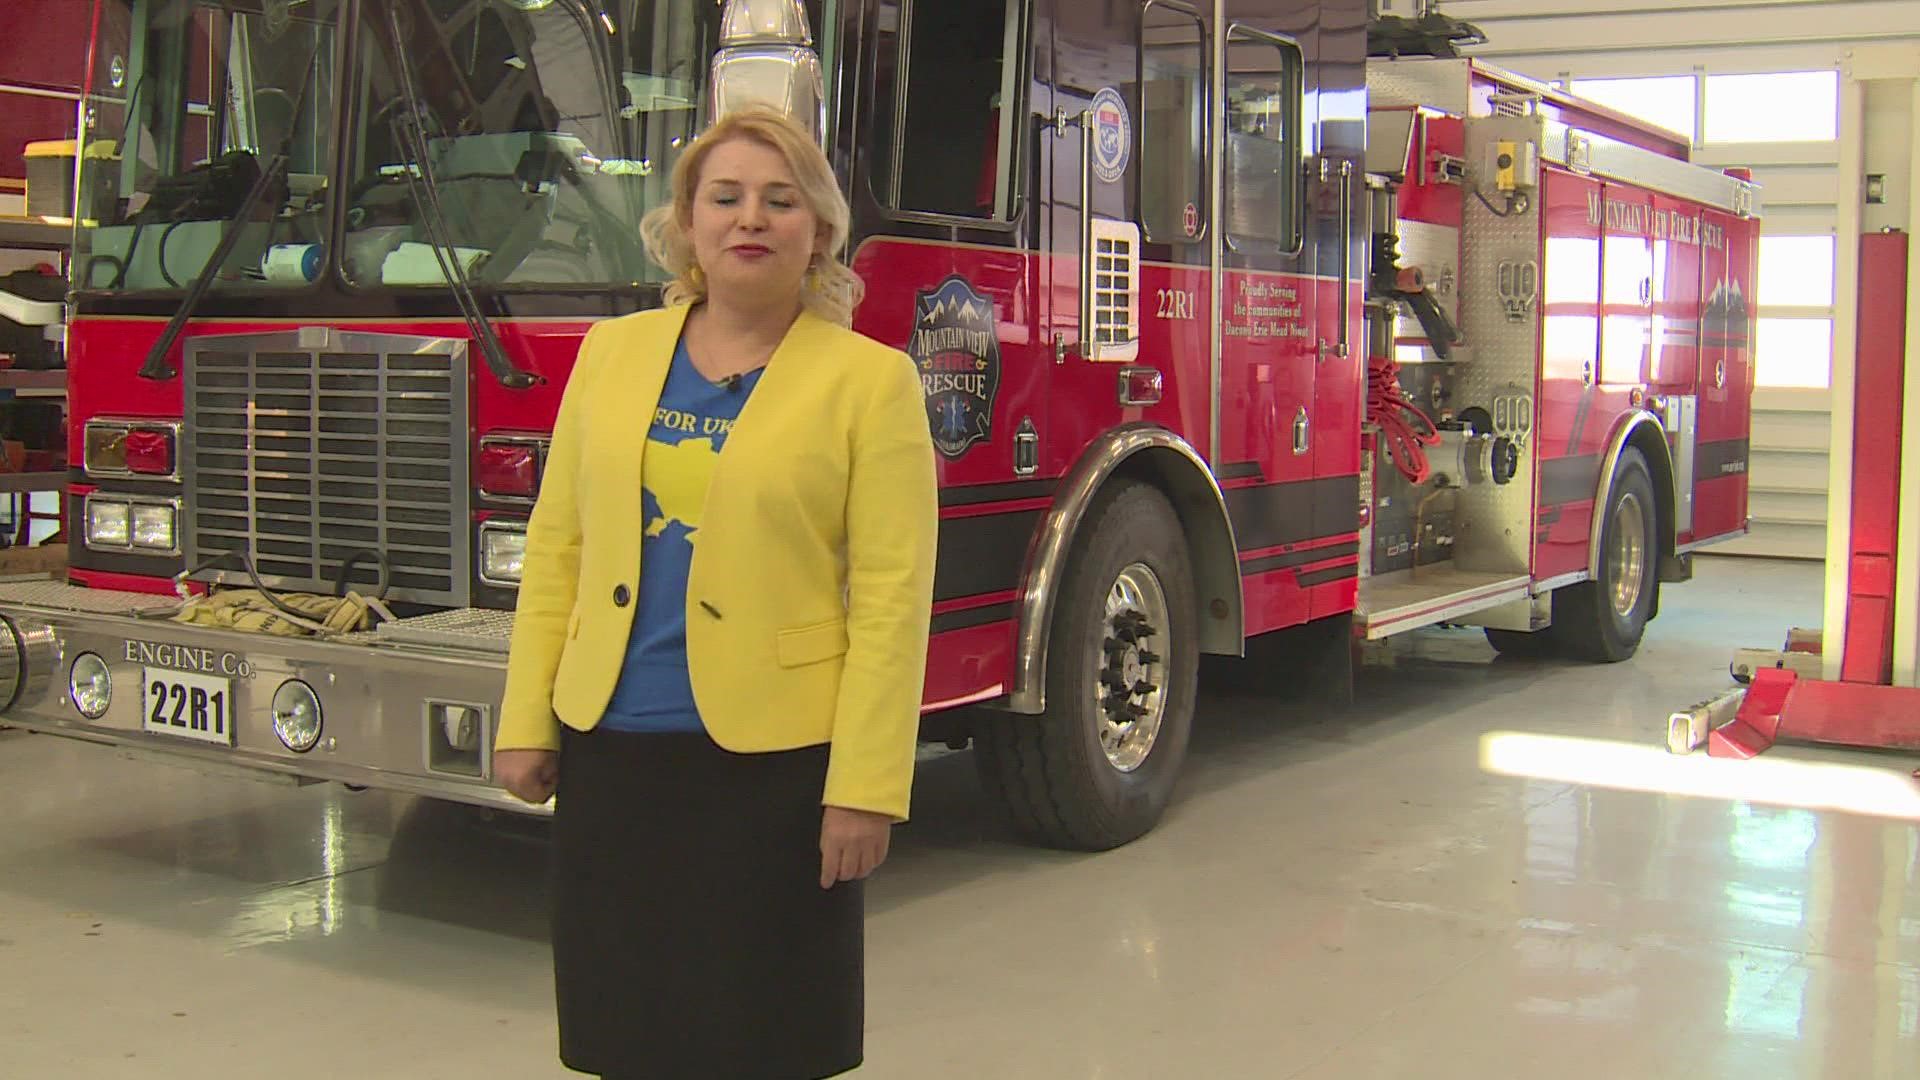 Mountain View Fire Rescue has a personal connection to Ukraine.